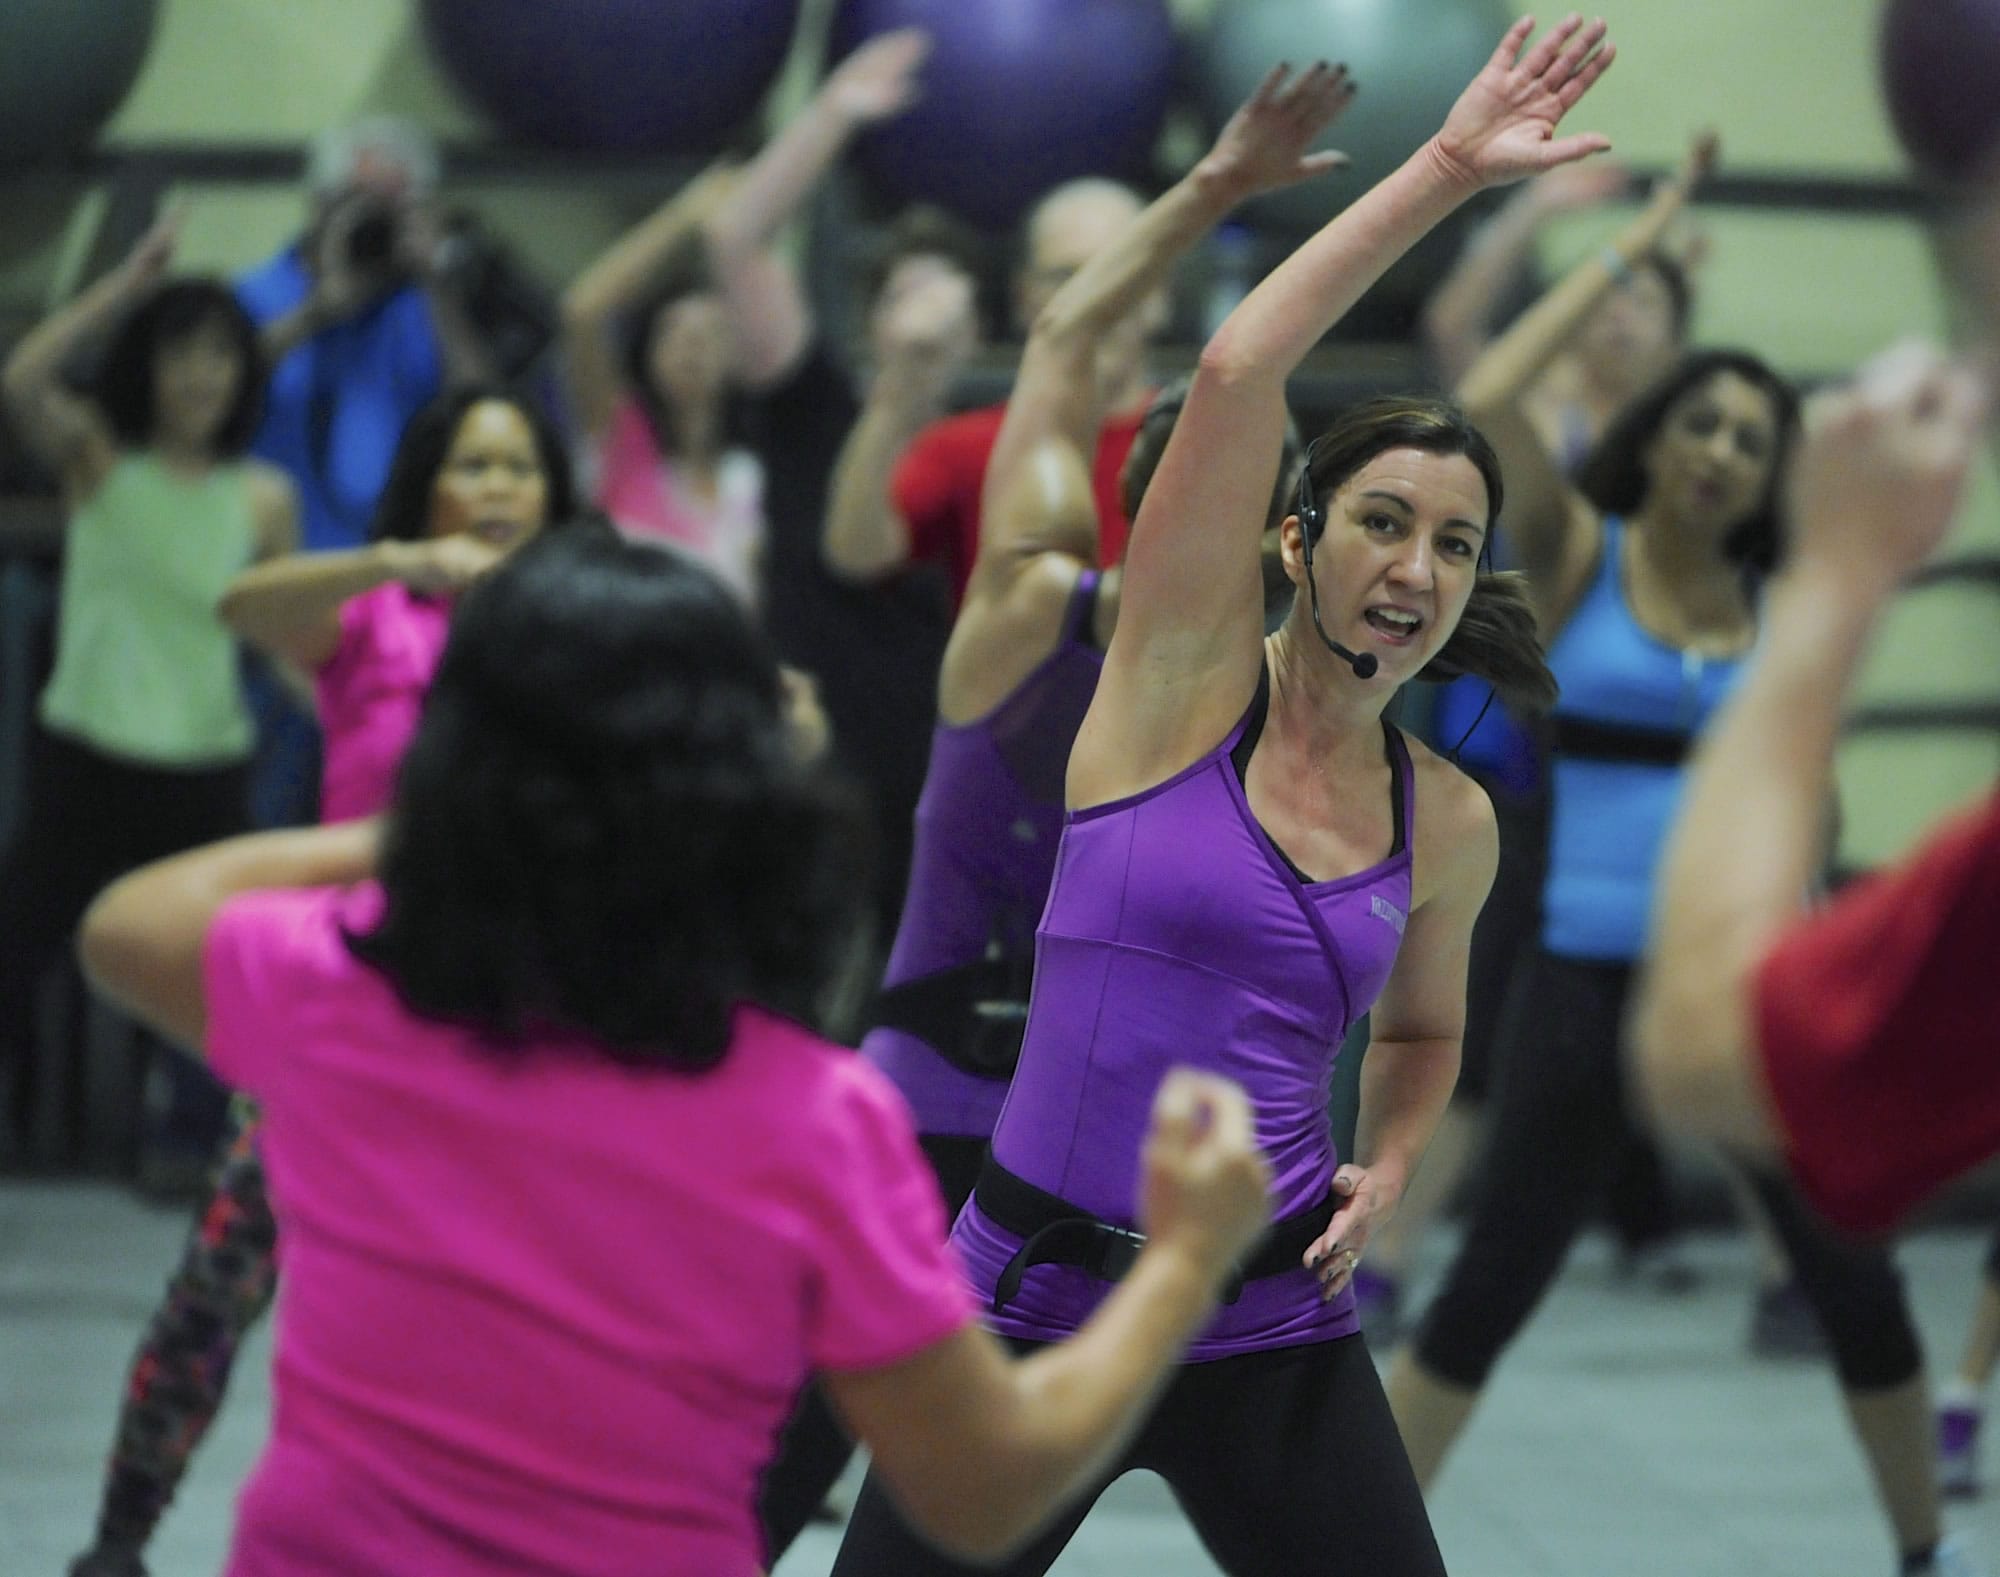 Jazzercise grows up - The Columbian